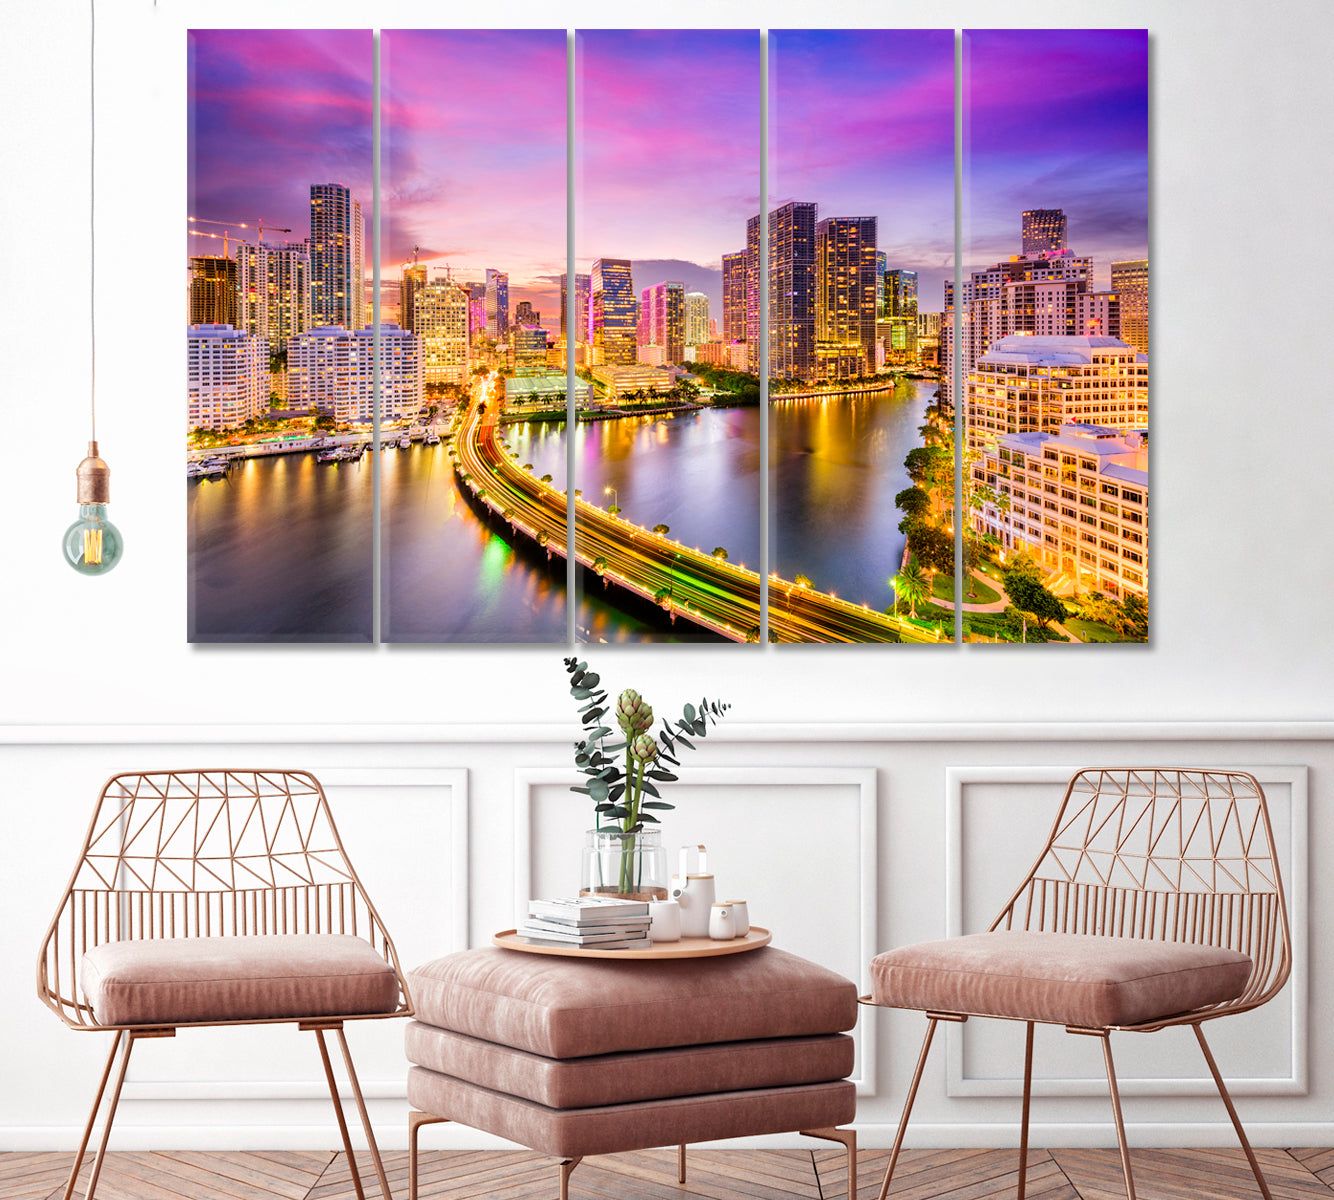 Miami Skyline on Biscayne Bay Canvas Print ArtLexy 5 Panels 36"x24" inches 